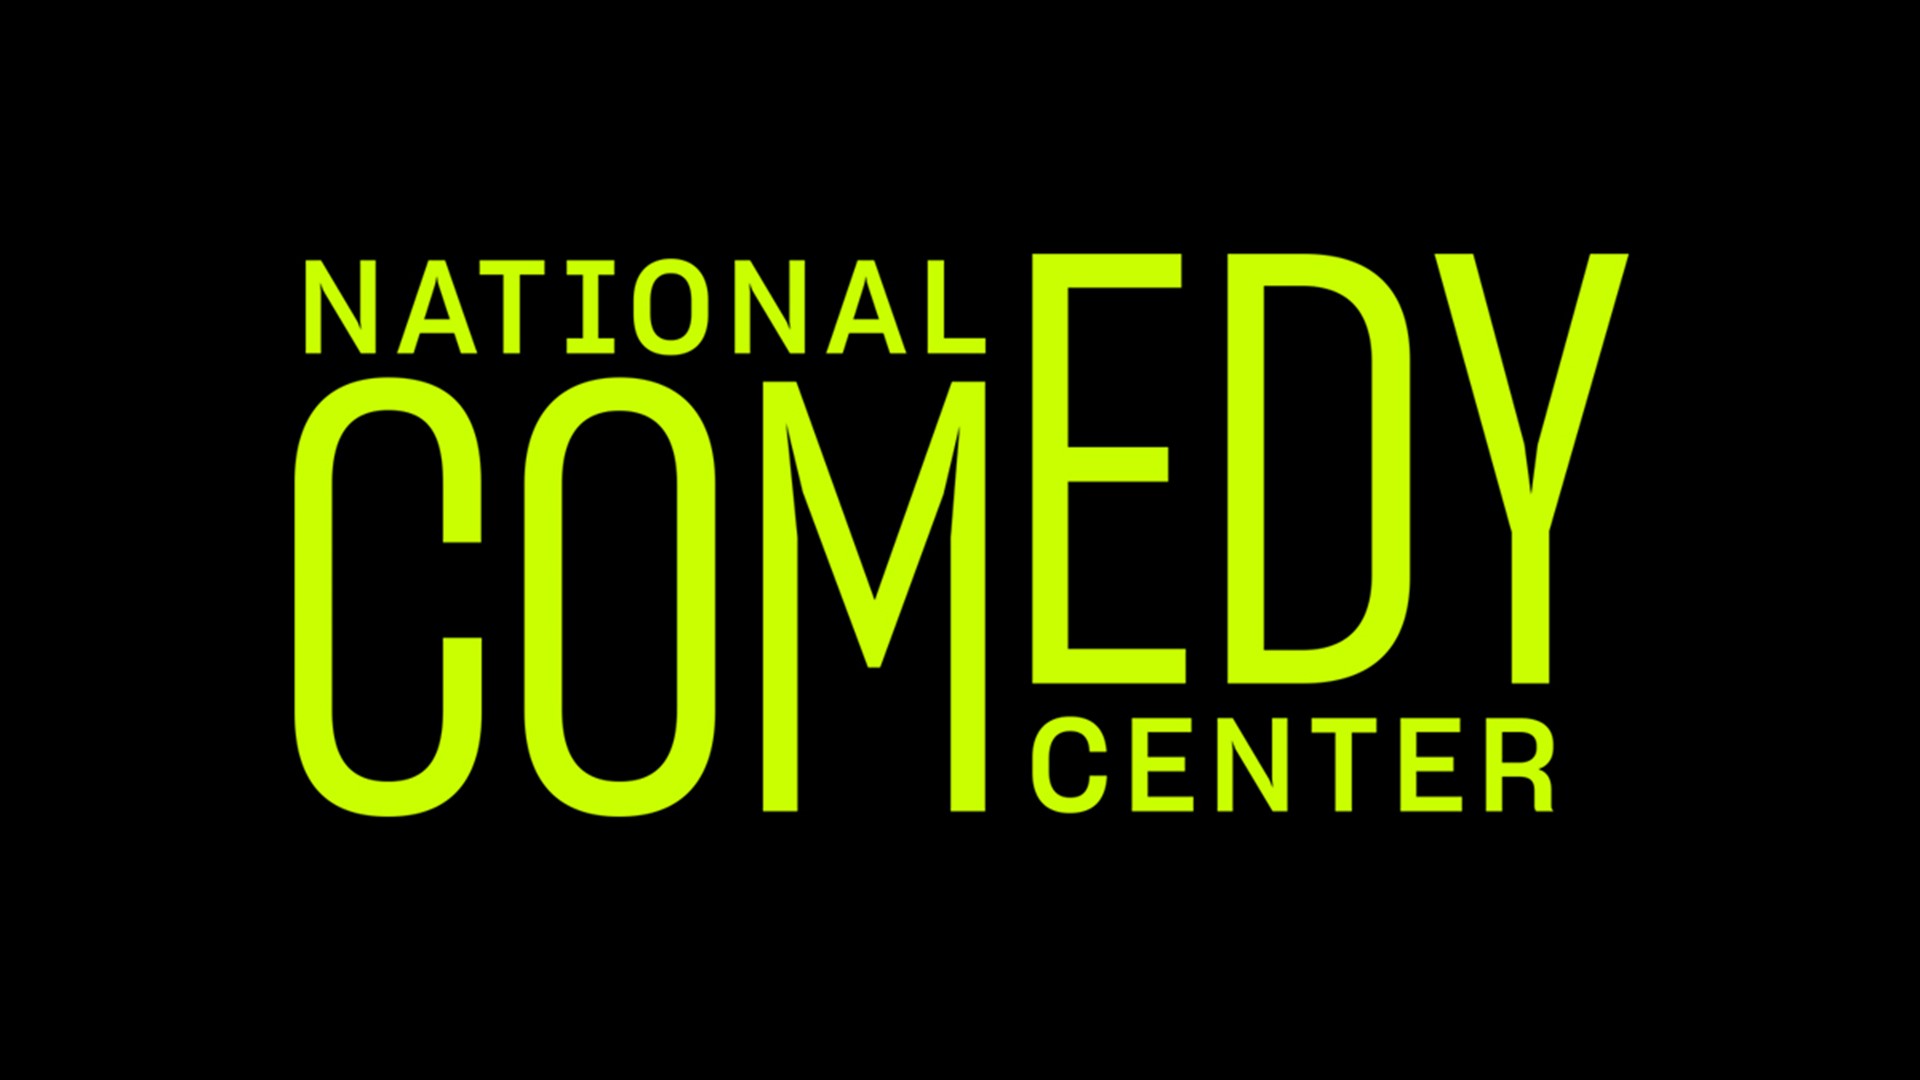 WNY Living - July 30 - National Comedy Center (THIS VIDEO IS SPONSORED BY THE NATIONAL COMEDY CENTER)